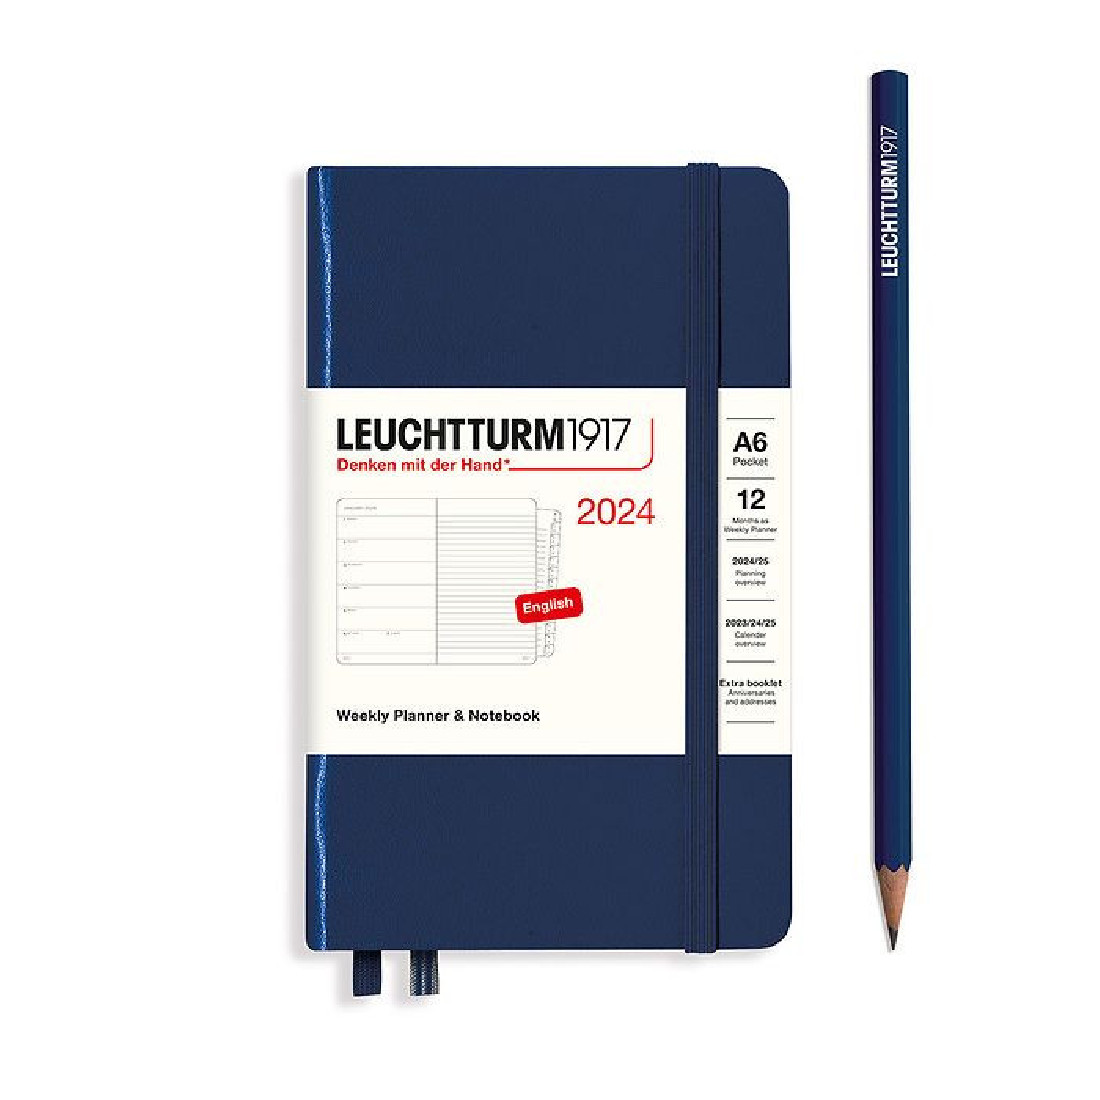 Leuchtturm 1917 Weekly Planner and Notebook 2024 Navy Pocket A6 Hard Cover